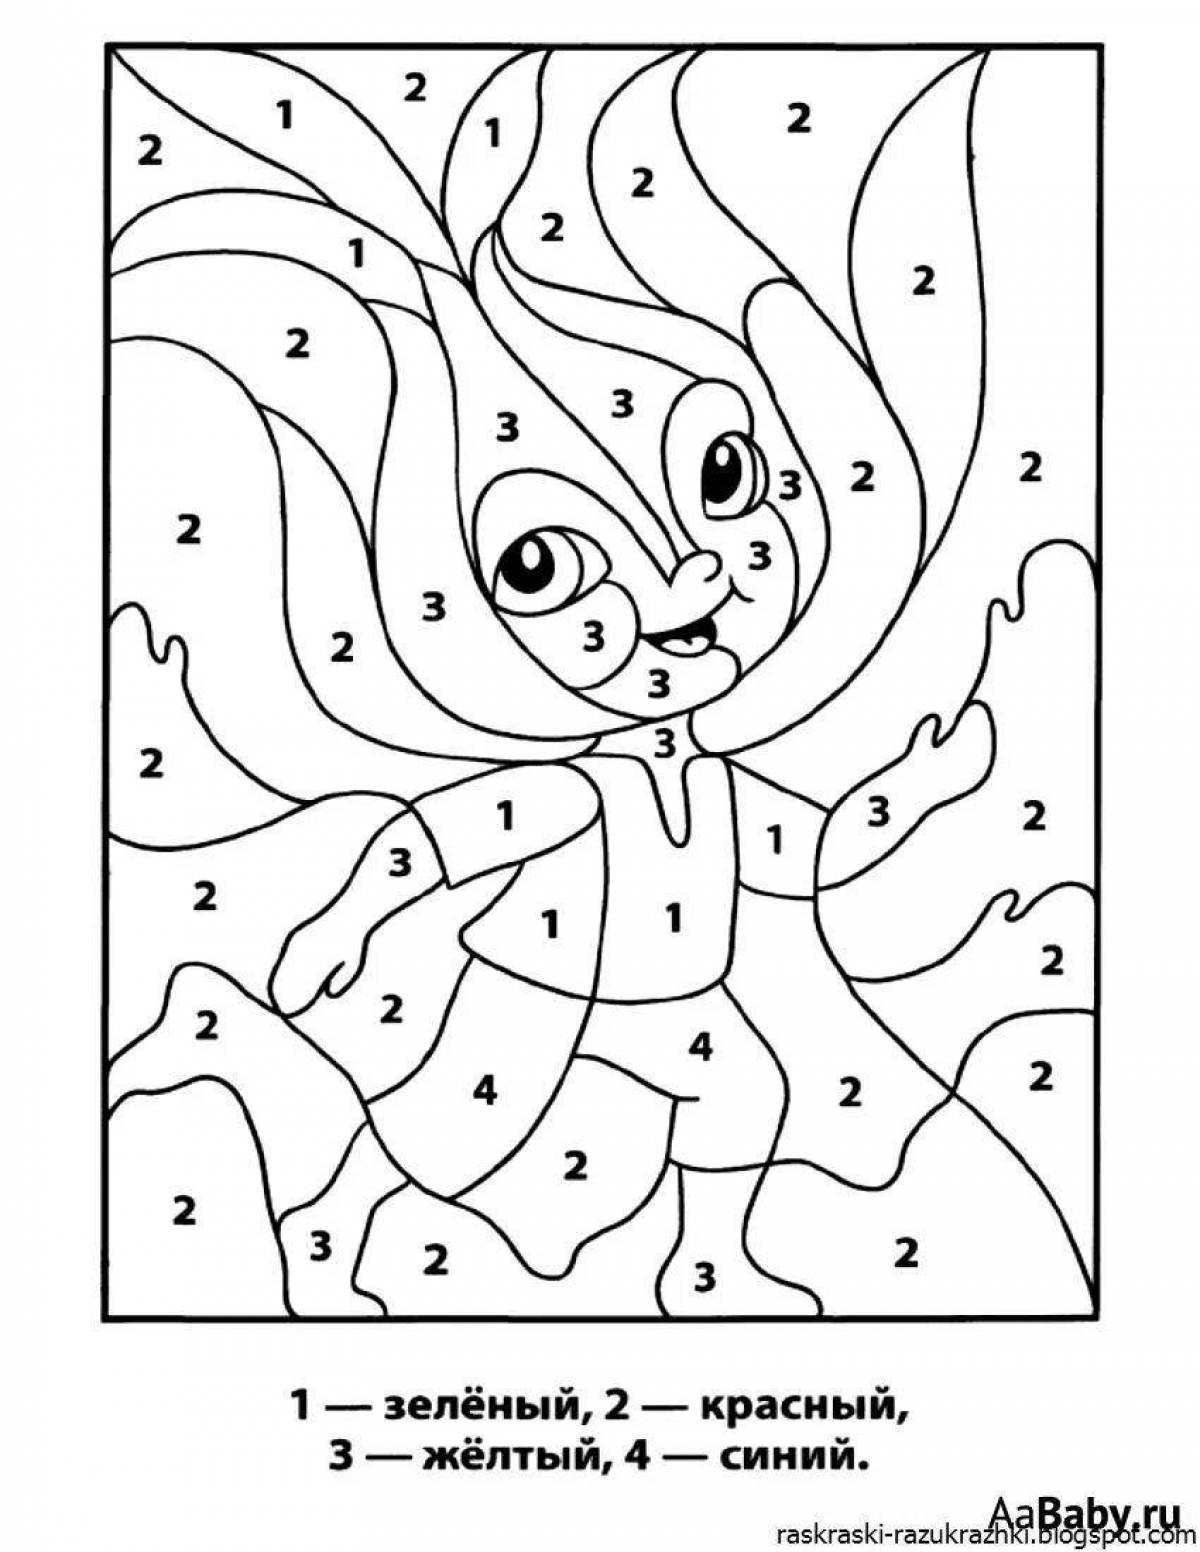 Colorful illusion 7 years by numbers coloring page